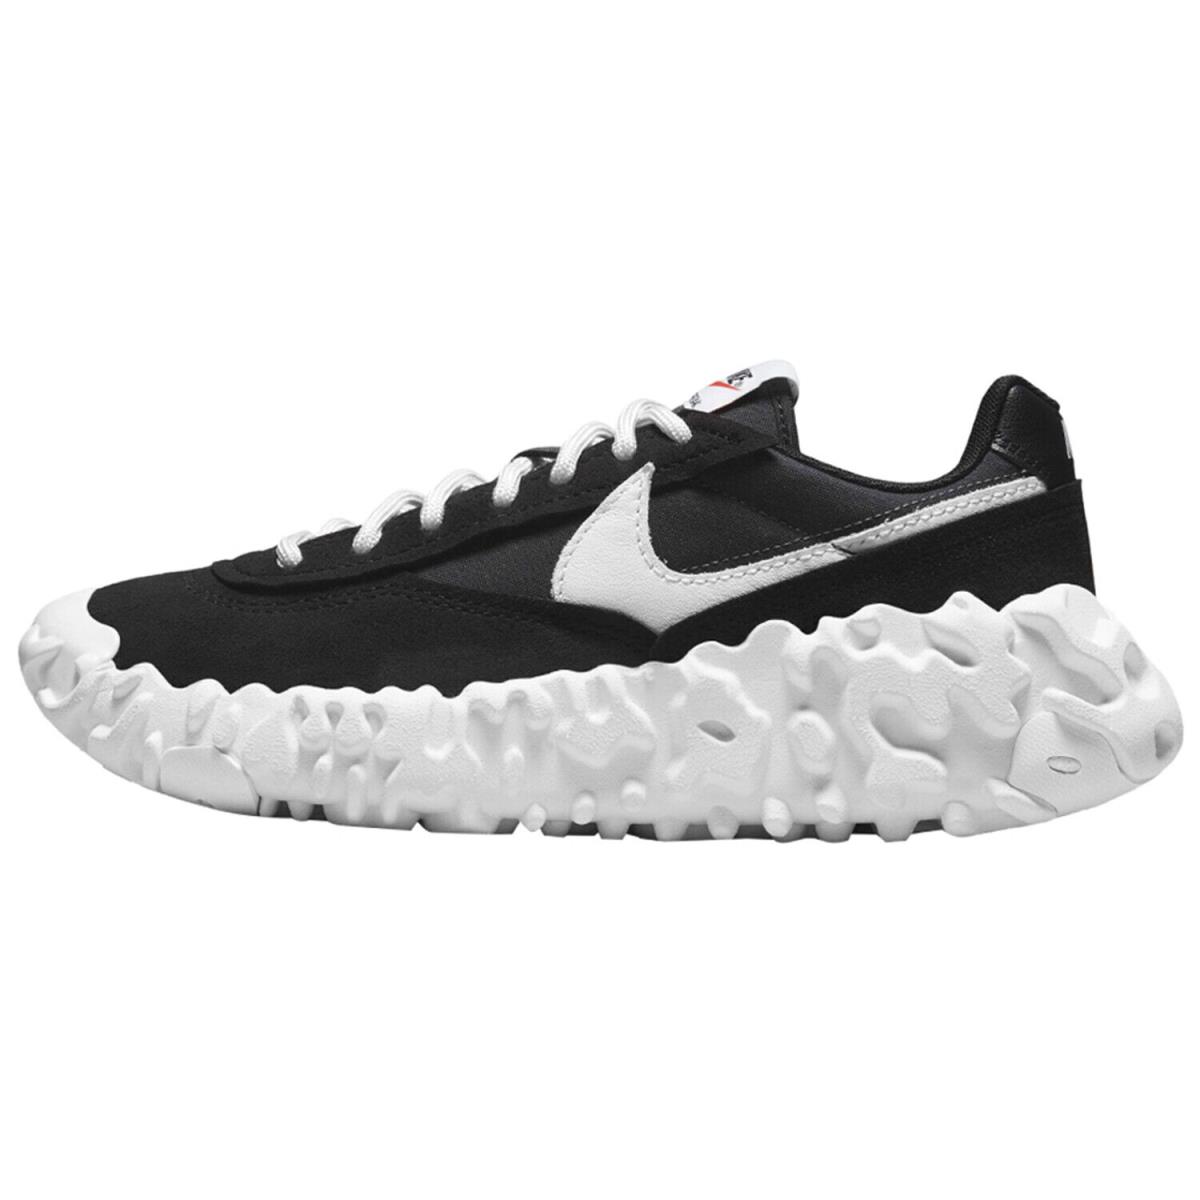 Nike Overbreak Mens DC3041-002 Black White Anthracite Running Shoes Size 9.5